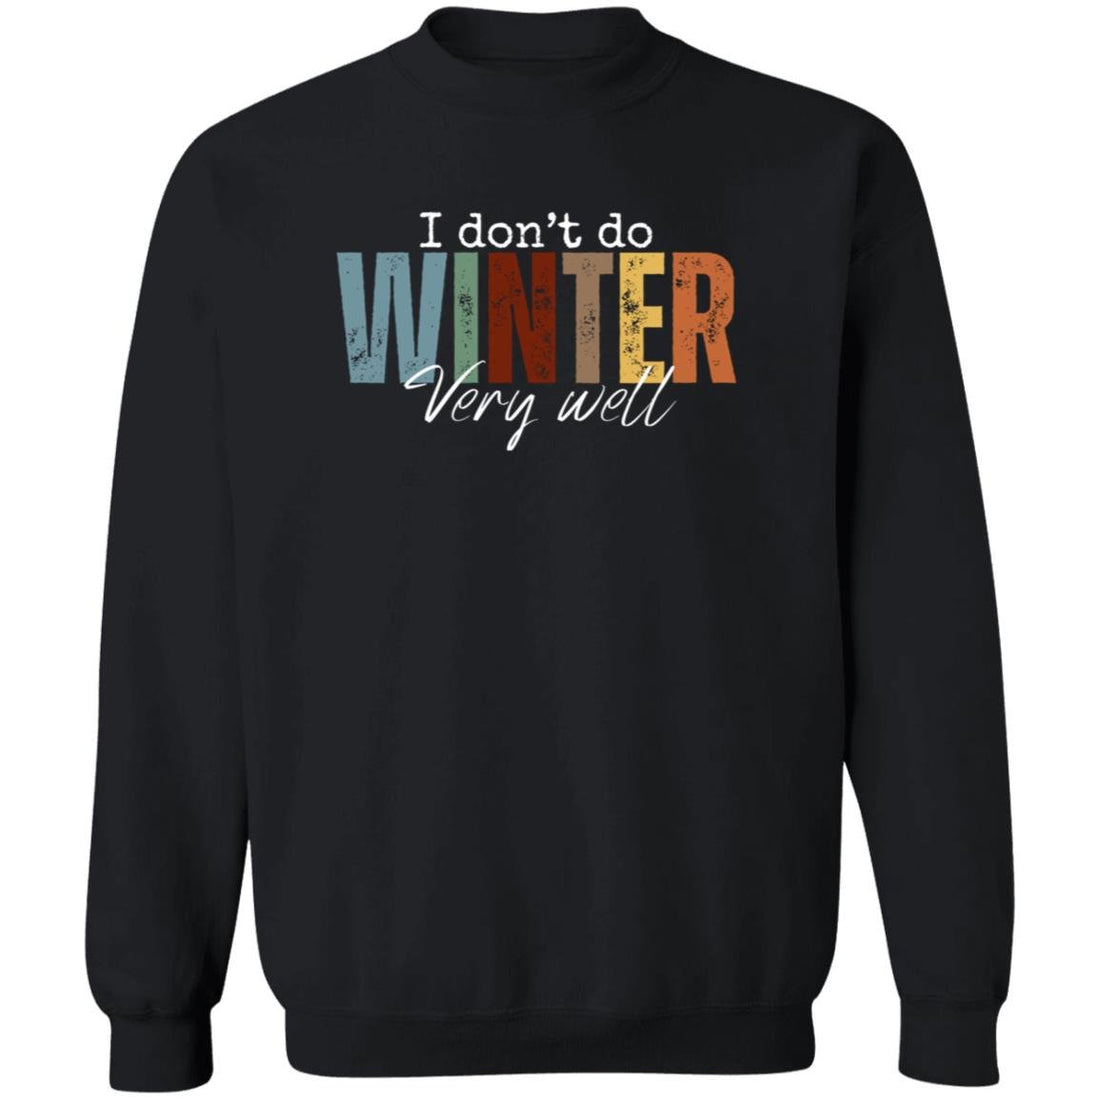 I Don't Do Winter Very Well Pullover Sweatshirt - Sweatshirts - Positively Sassy - I Don't Do Winter Very Well Pullover Sweatshirt